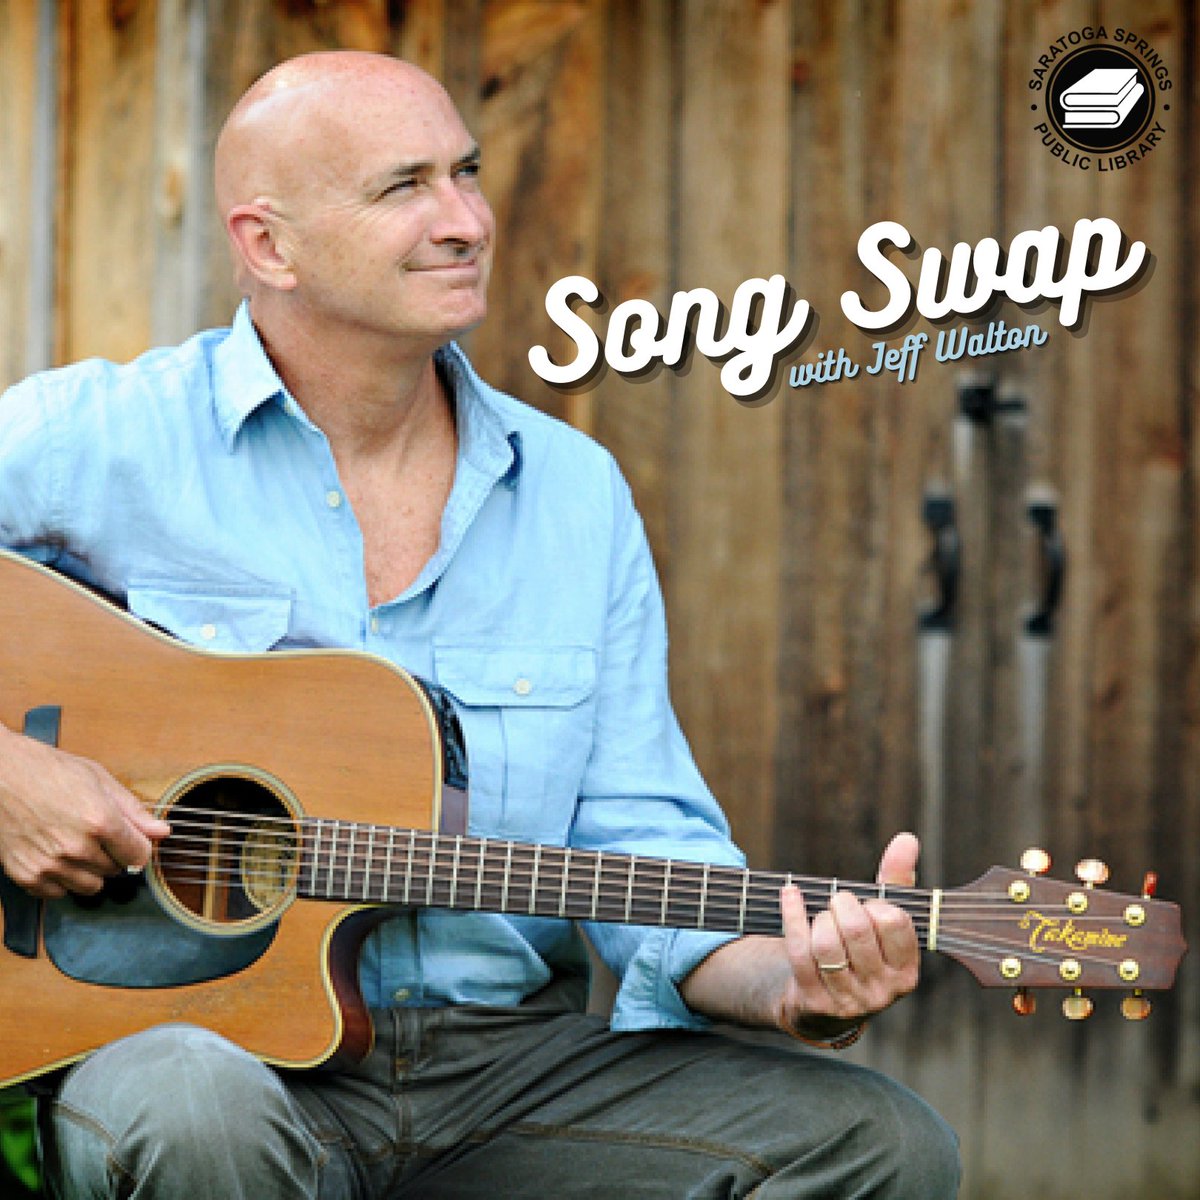 Jeff Walton returns Monday (11/20) at 7 p.m. for another #SongSwap! Grab your favorite acoustic (or electric!) instrument, bring your love of music, and join us for an informal session. Feel free to bring your own tune to play and share. Register online:
sspl.libcal.com/event/10920136